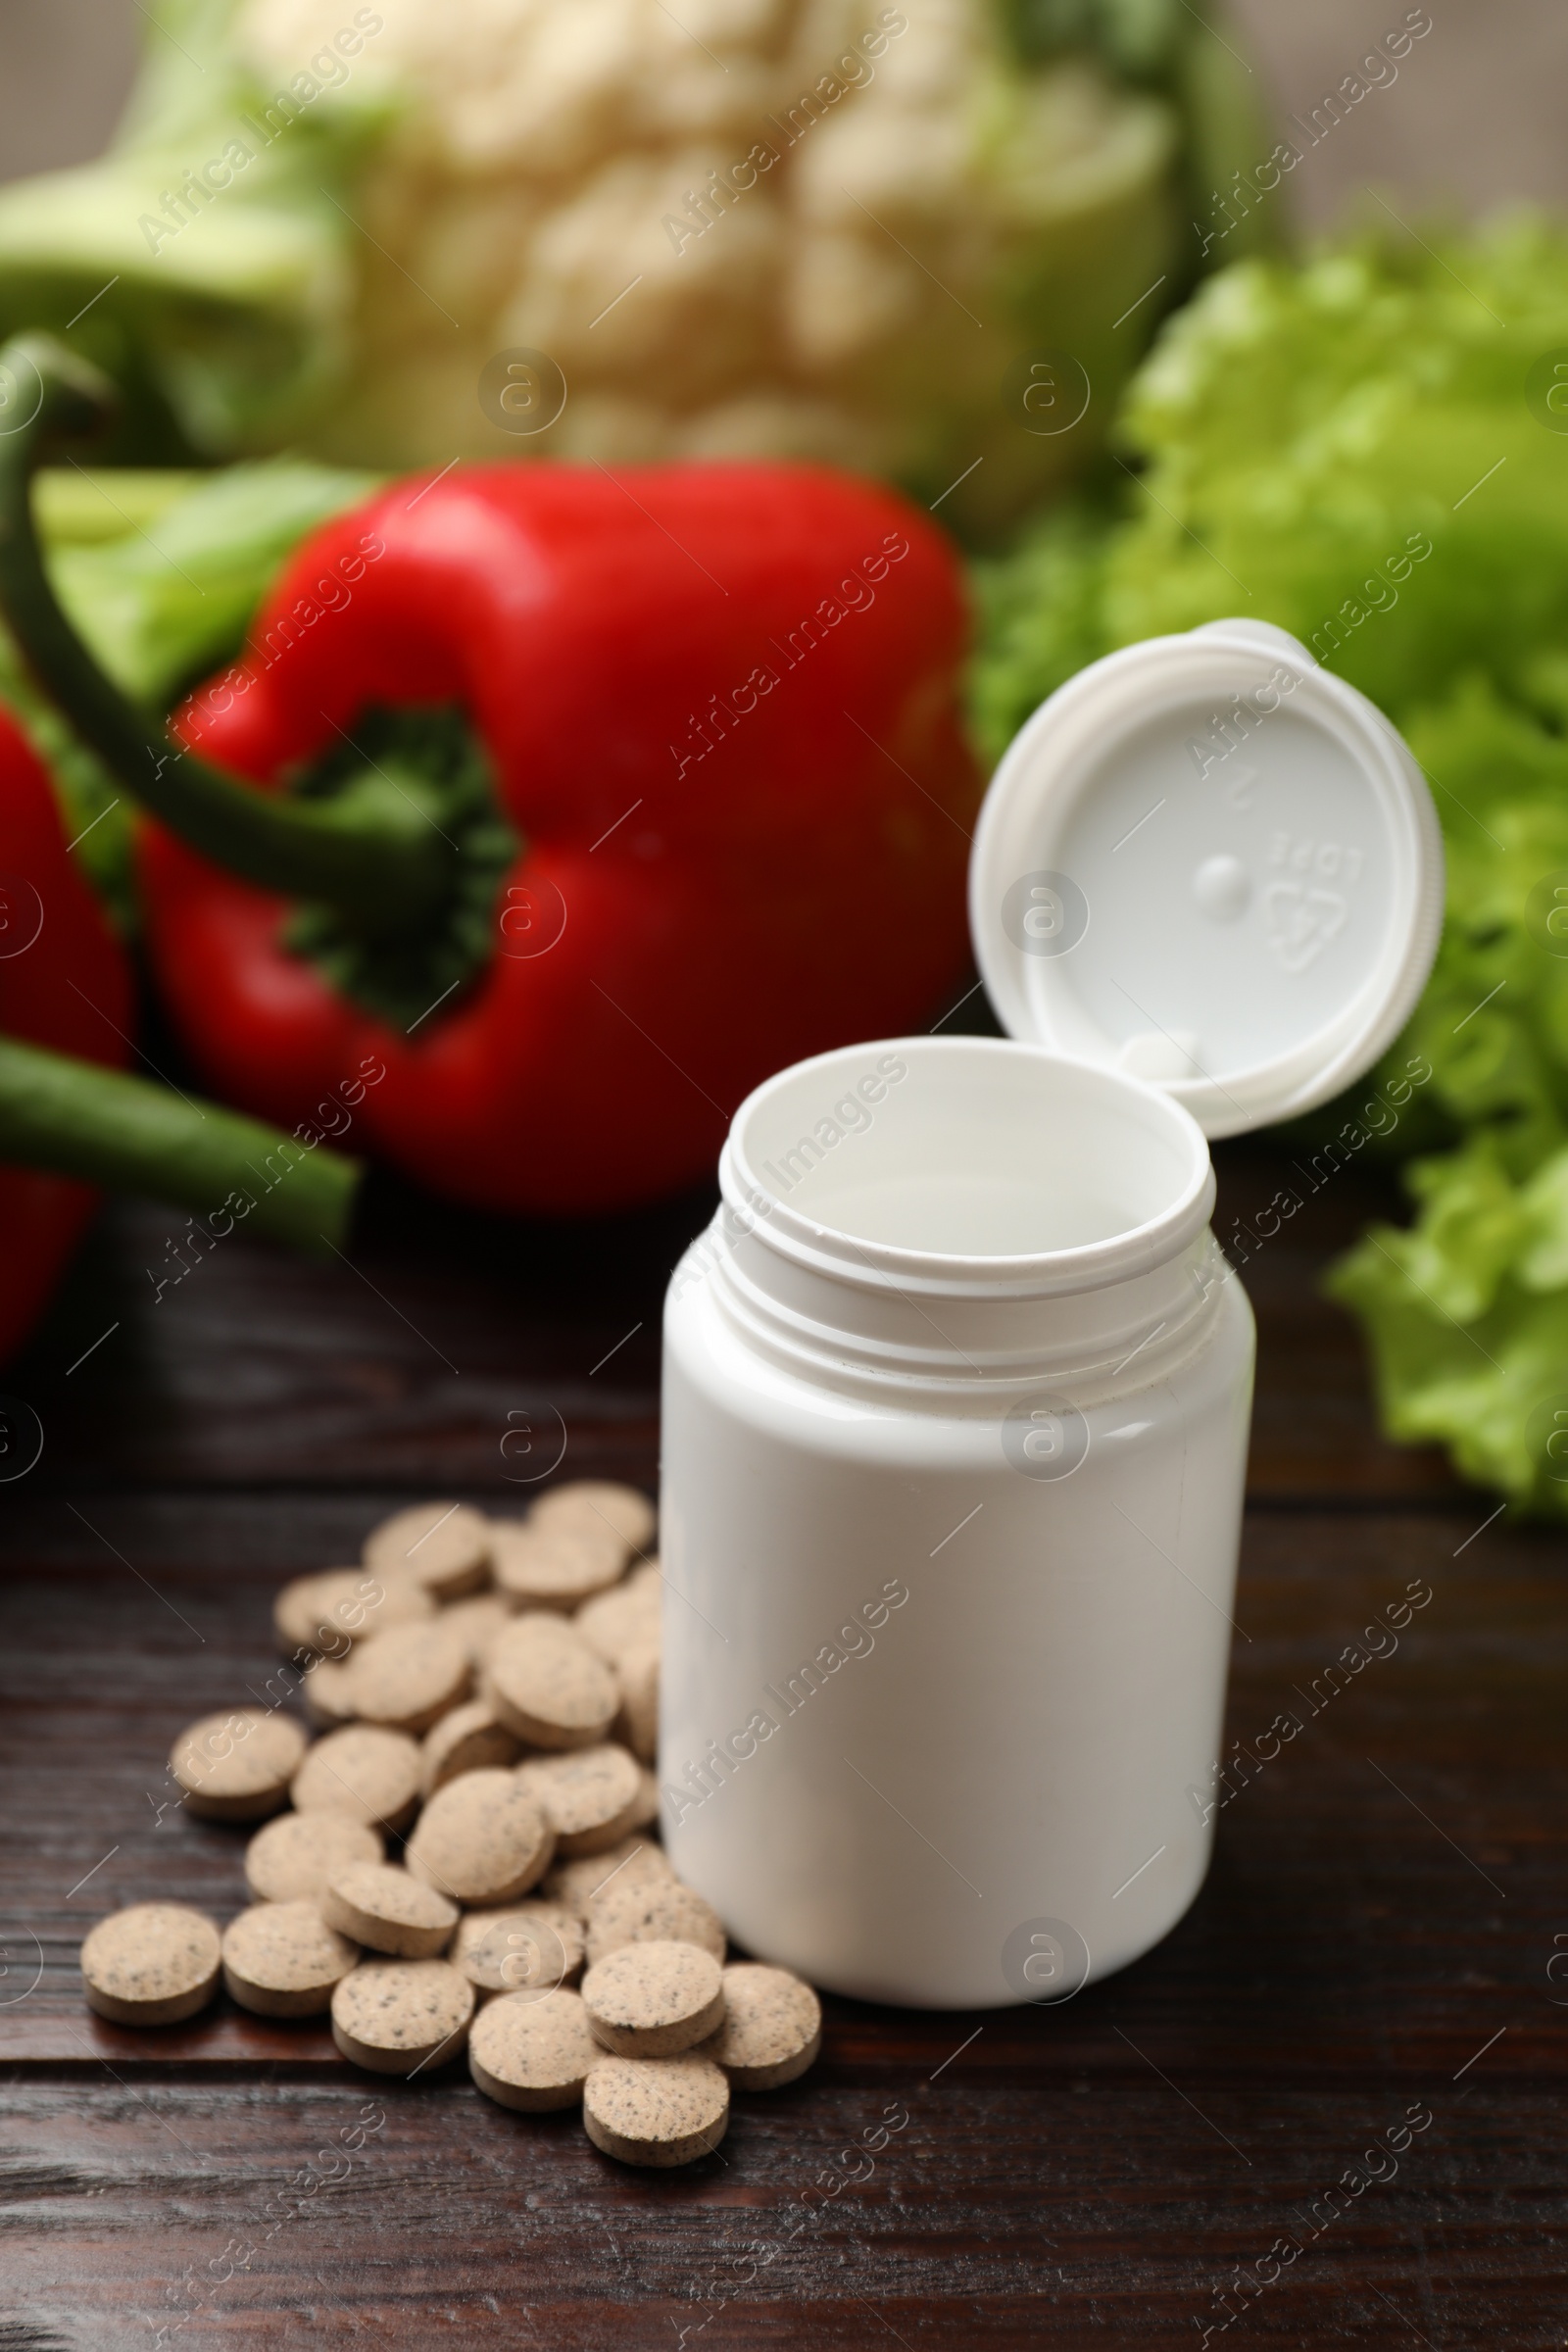 Photo of Dietary supplements. Plastic bottle, pills and food products on wooden table